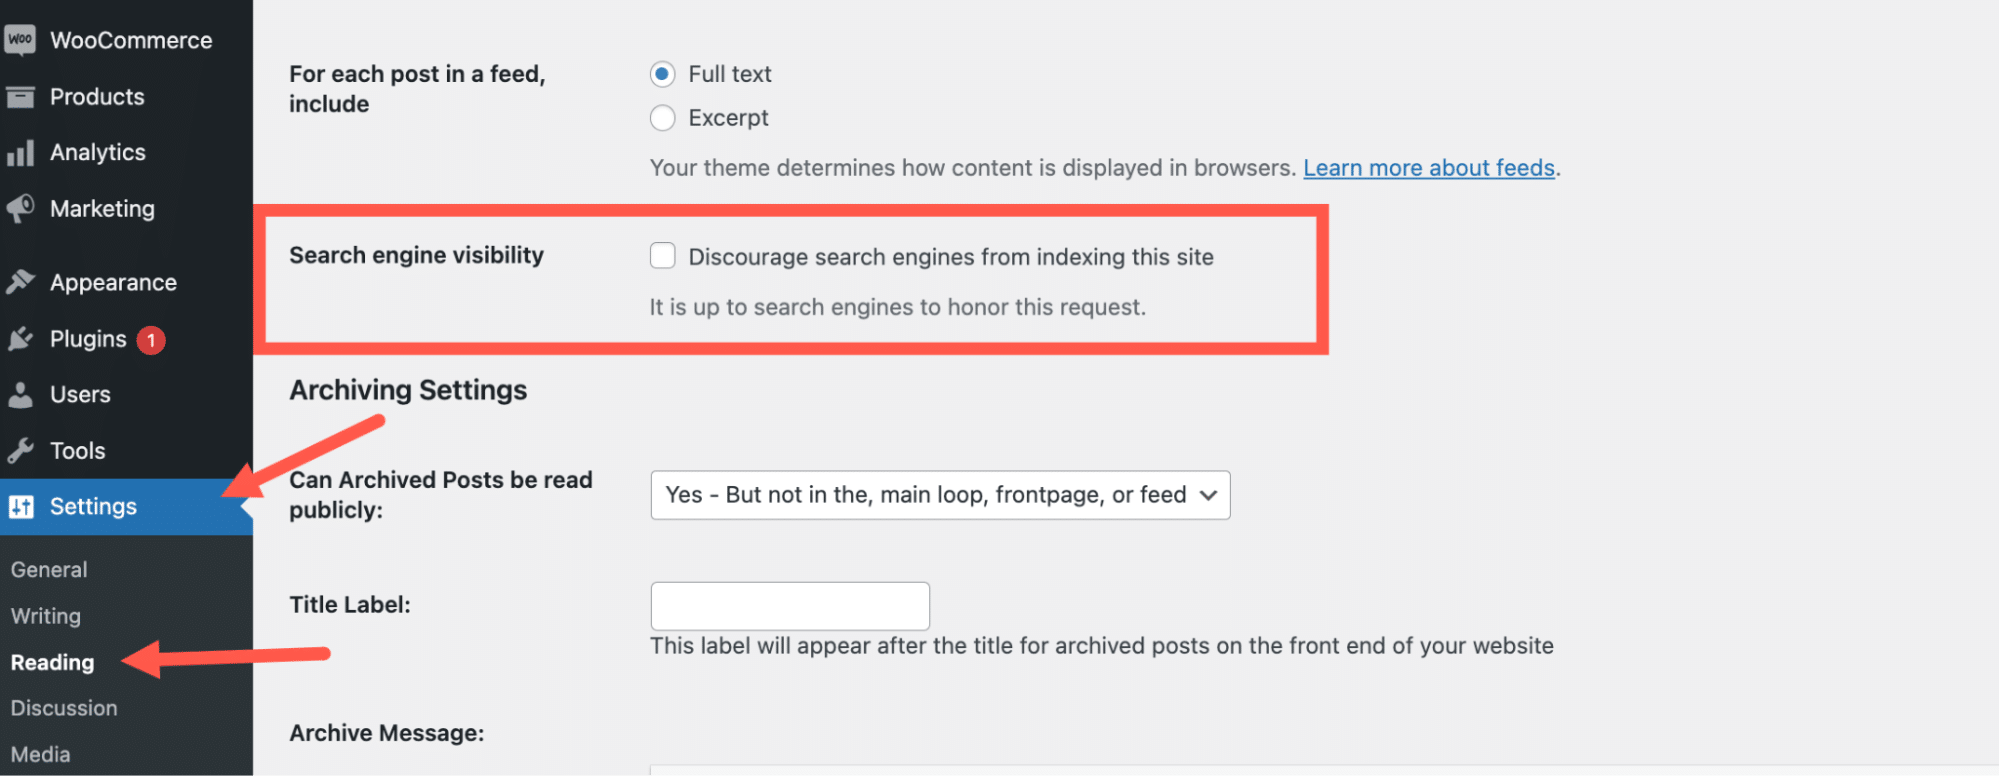 WordPress Reading settings screen to discourage search engines from indexing the site highlighted